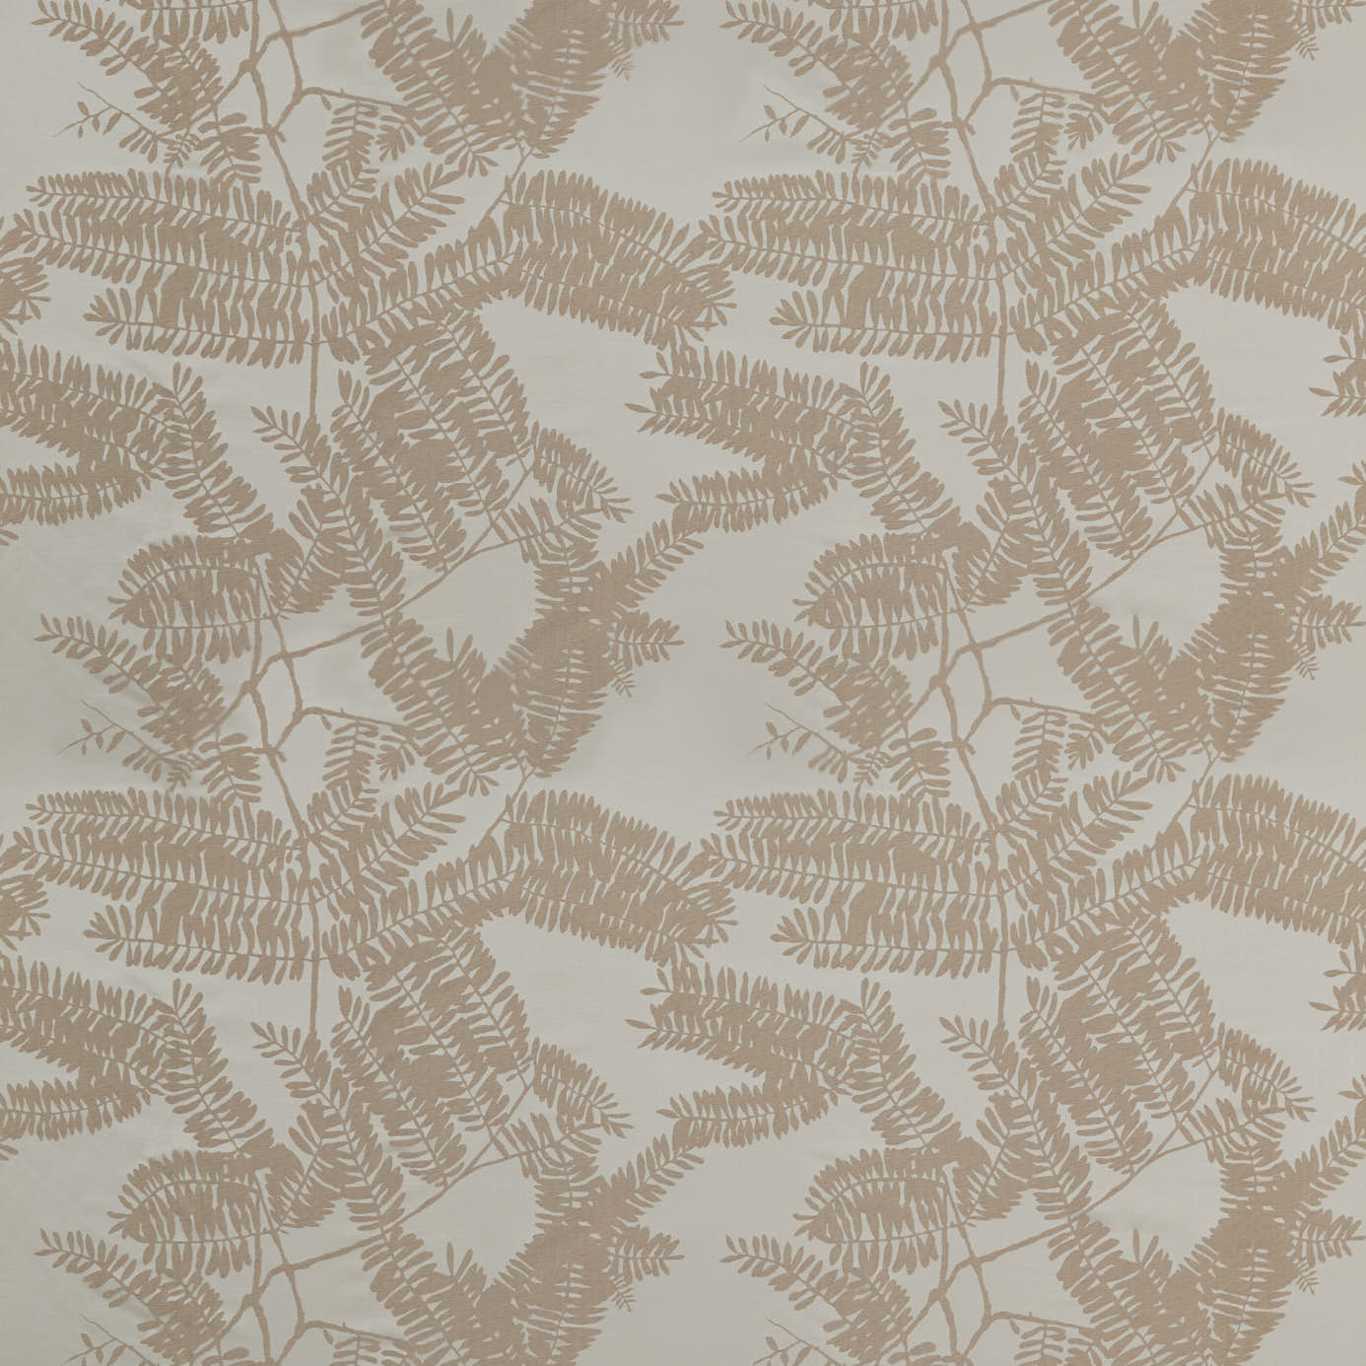 Extravagance Champagne Fabric by HAR